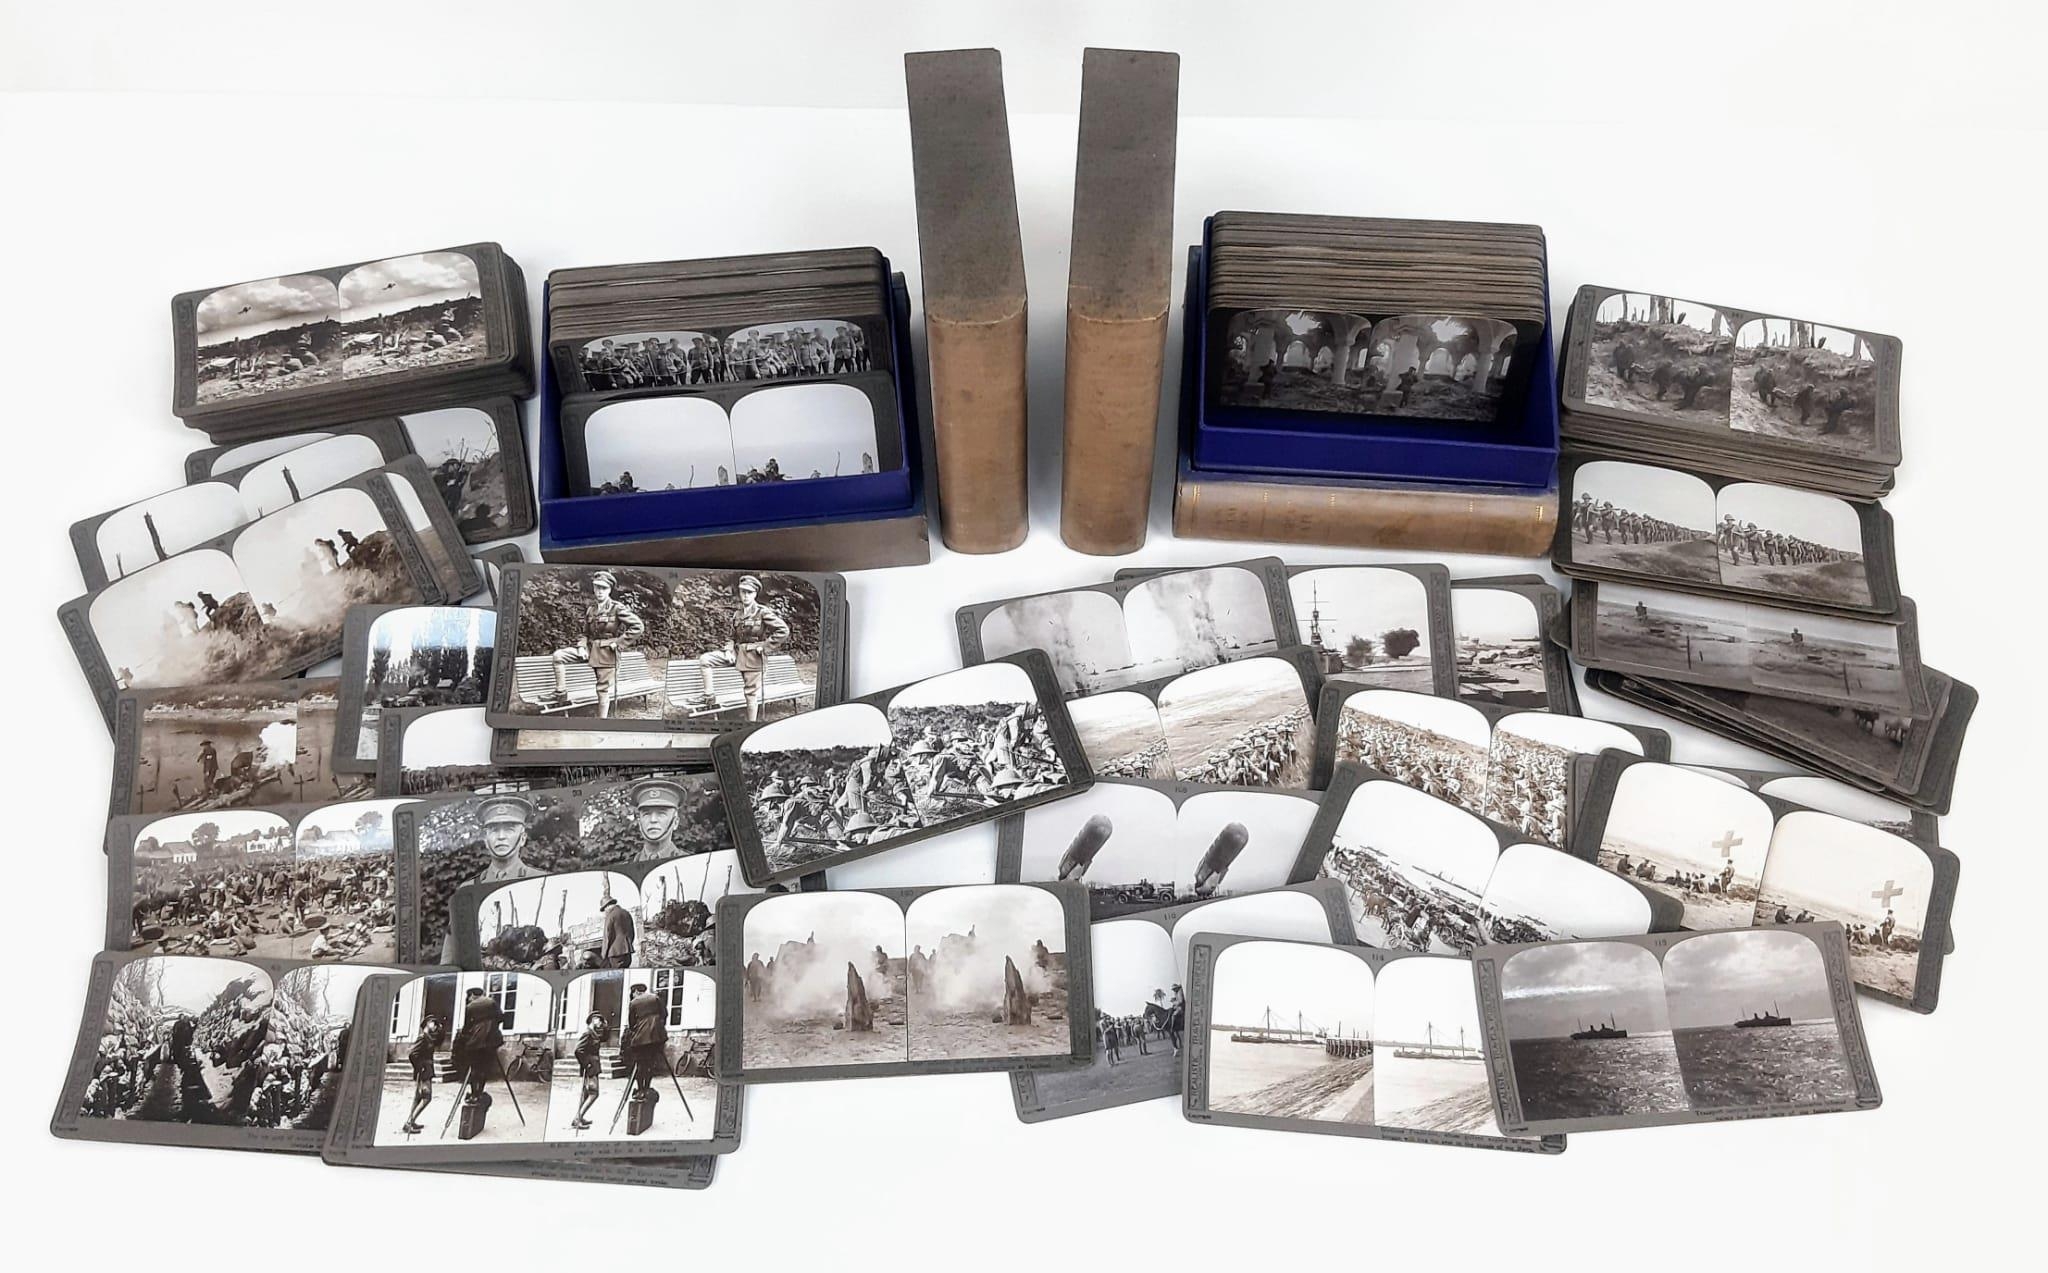 200 Great War Stereoscope Viewing Cards. Two box-sets numbered 1 - 200. Each formed of two silver-